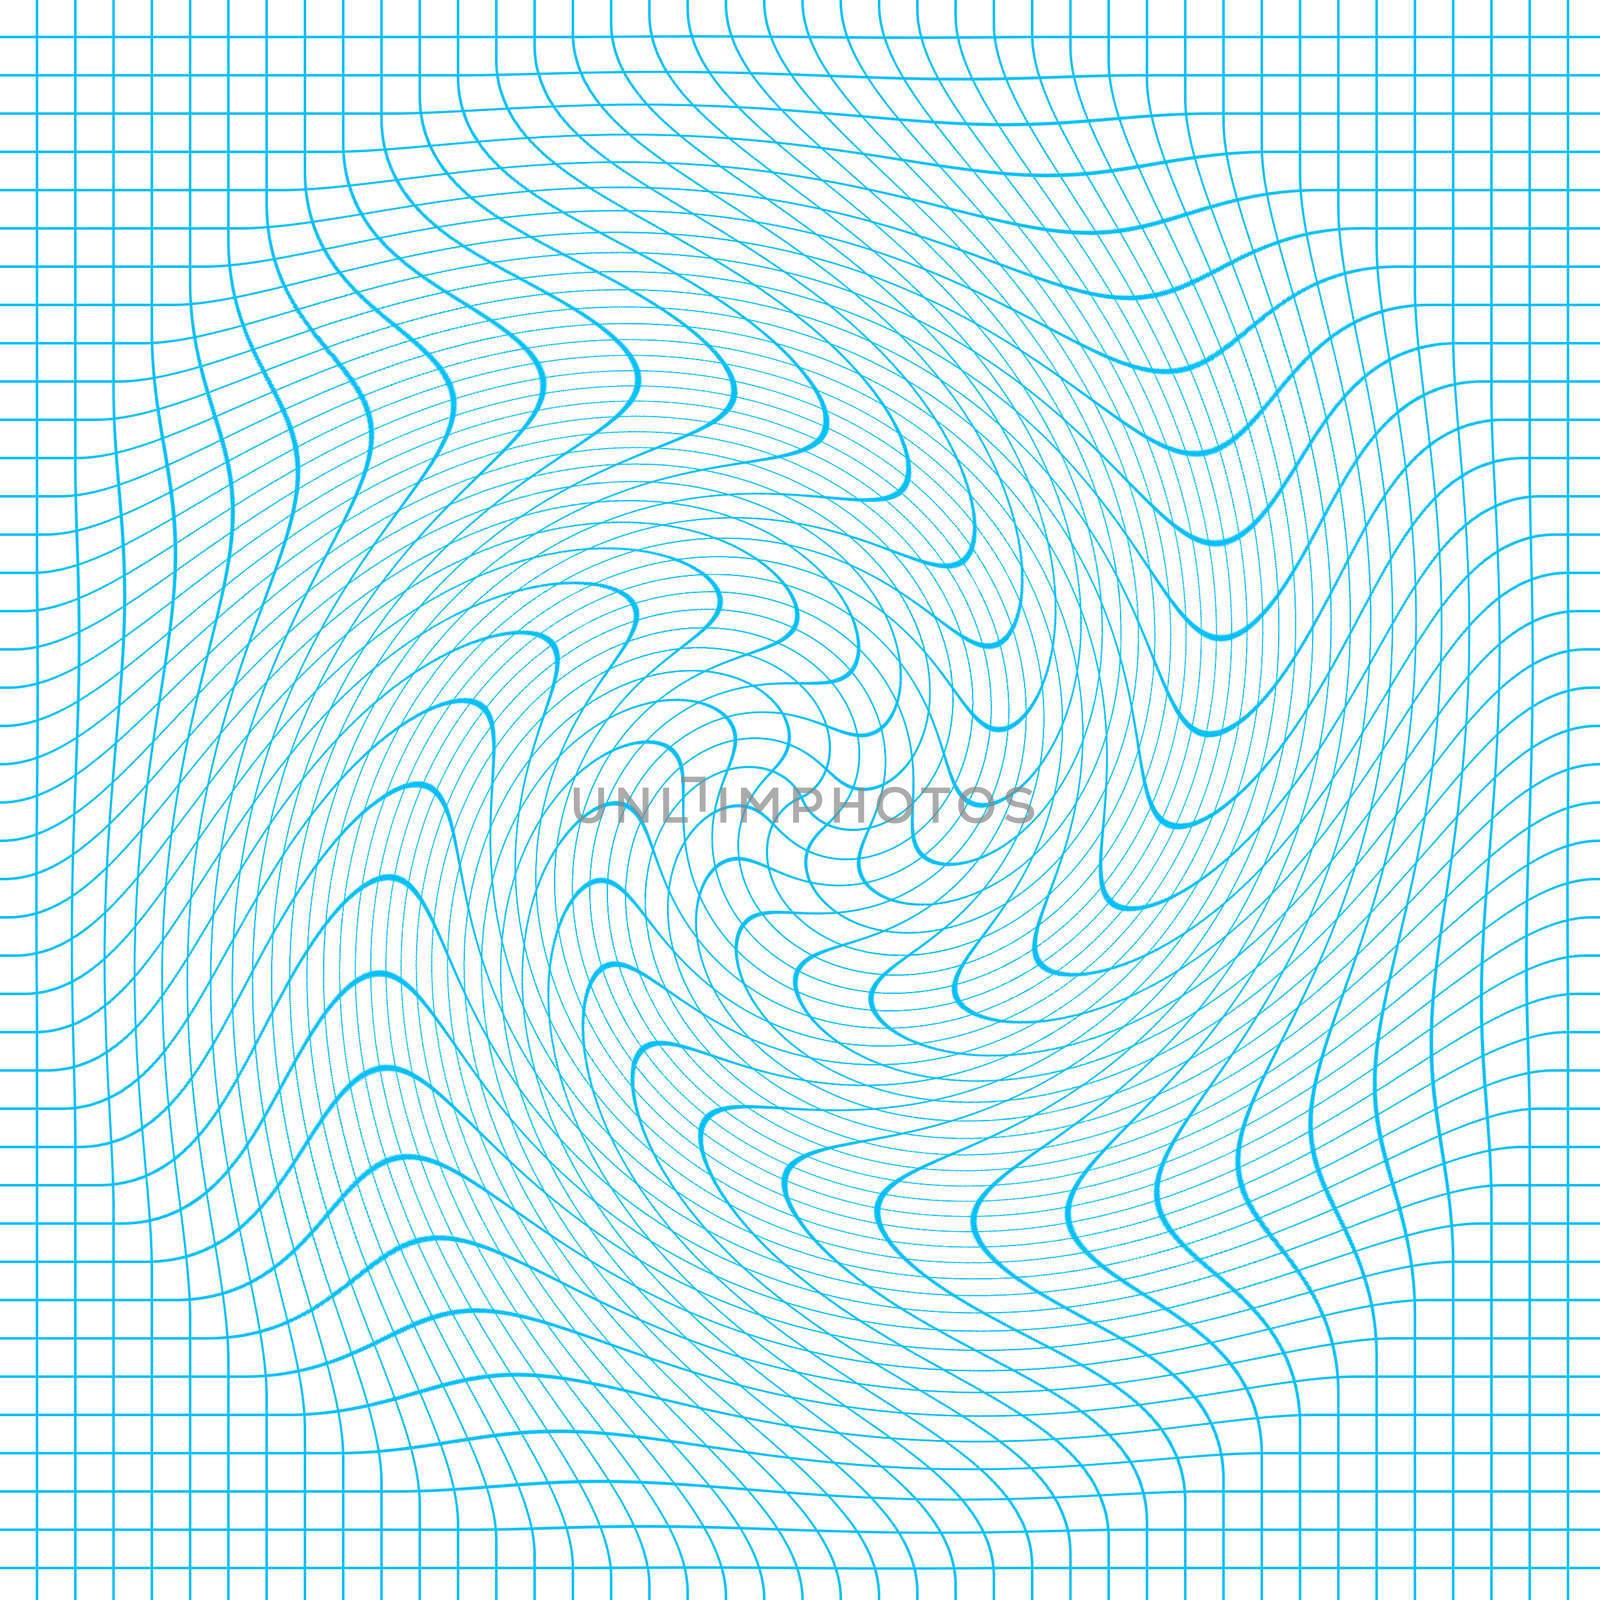 distorted and twirled 3d grid